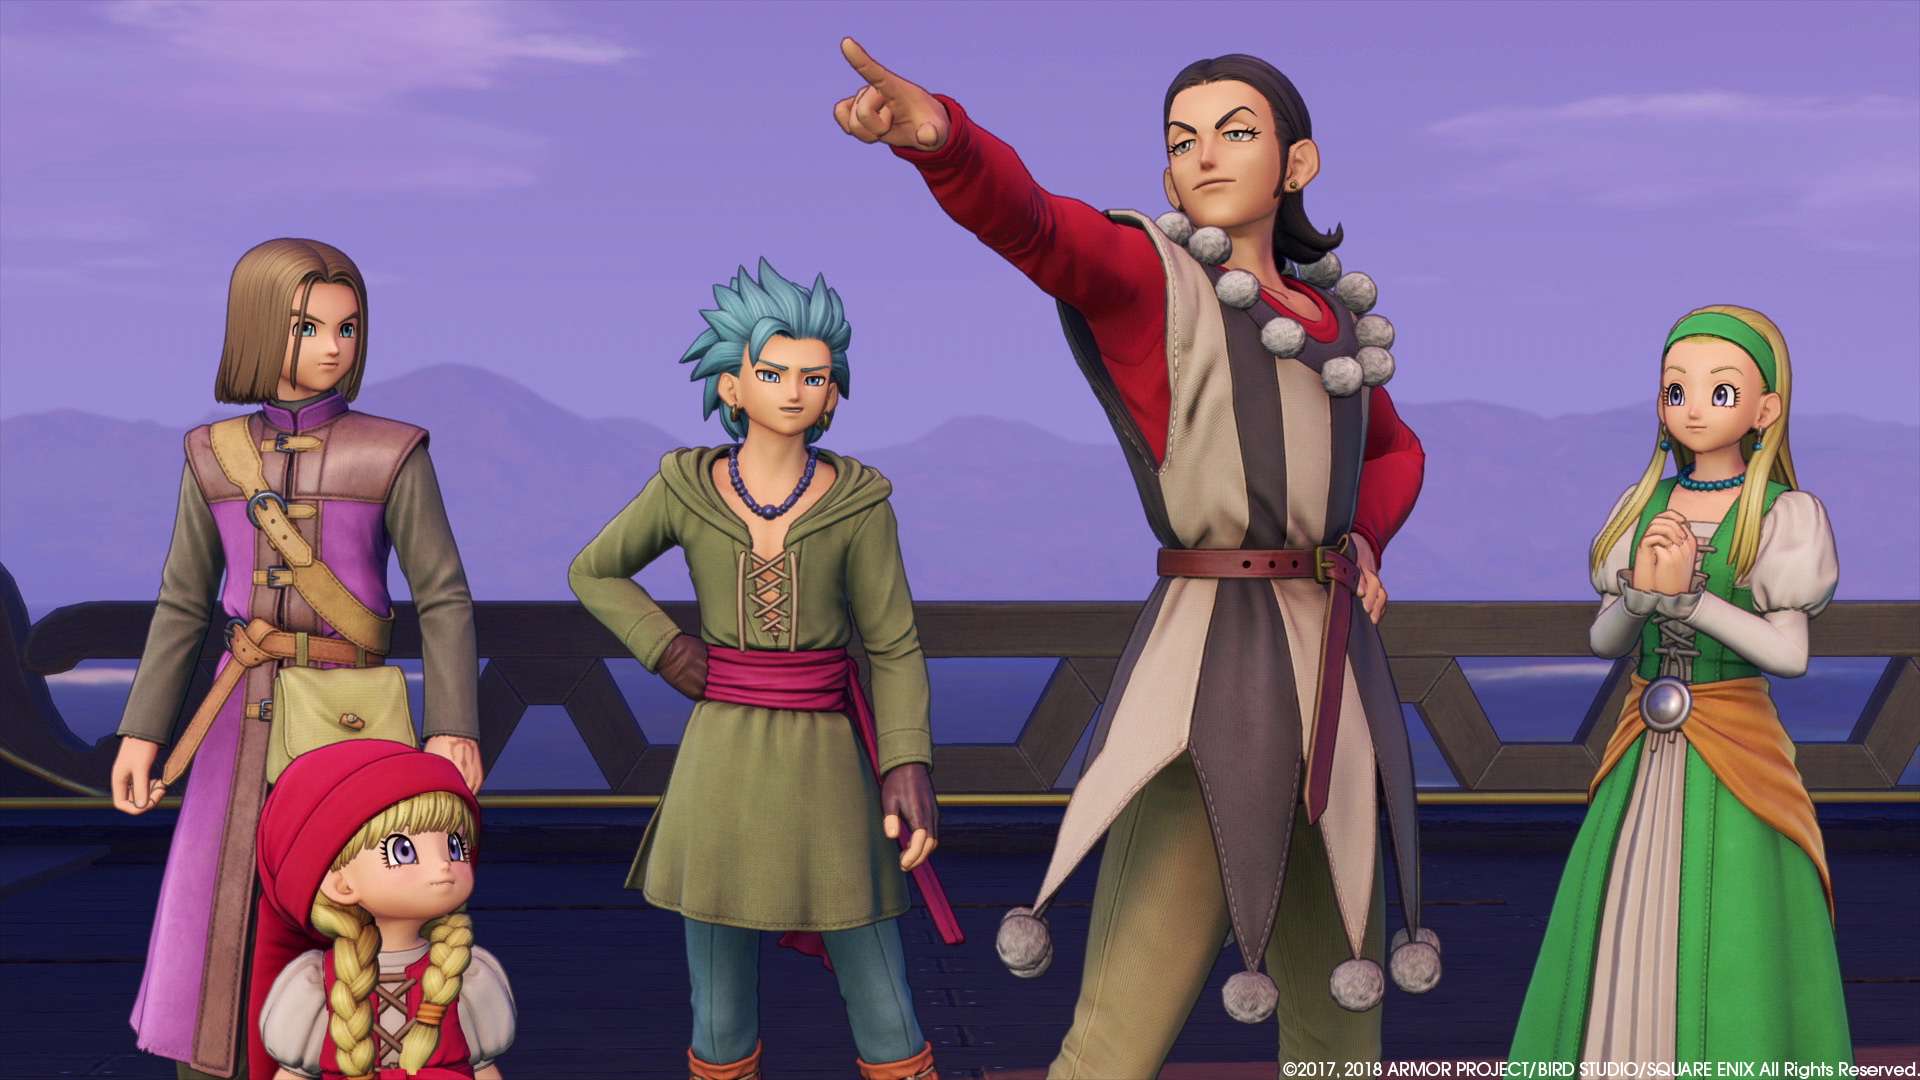 DRAGON QUEST XI S: Inside the side stories - Erik and Sylvando